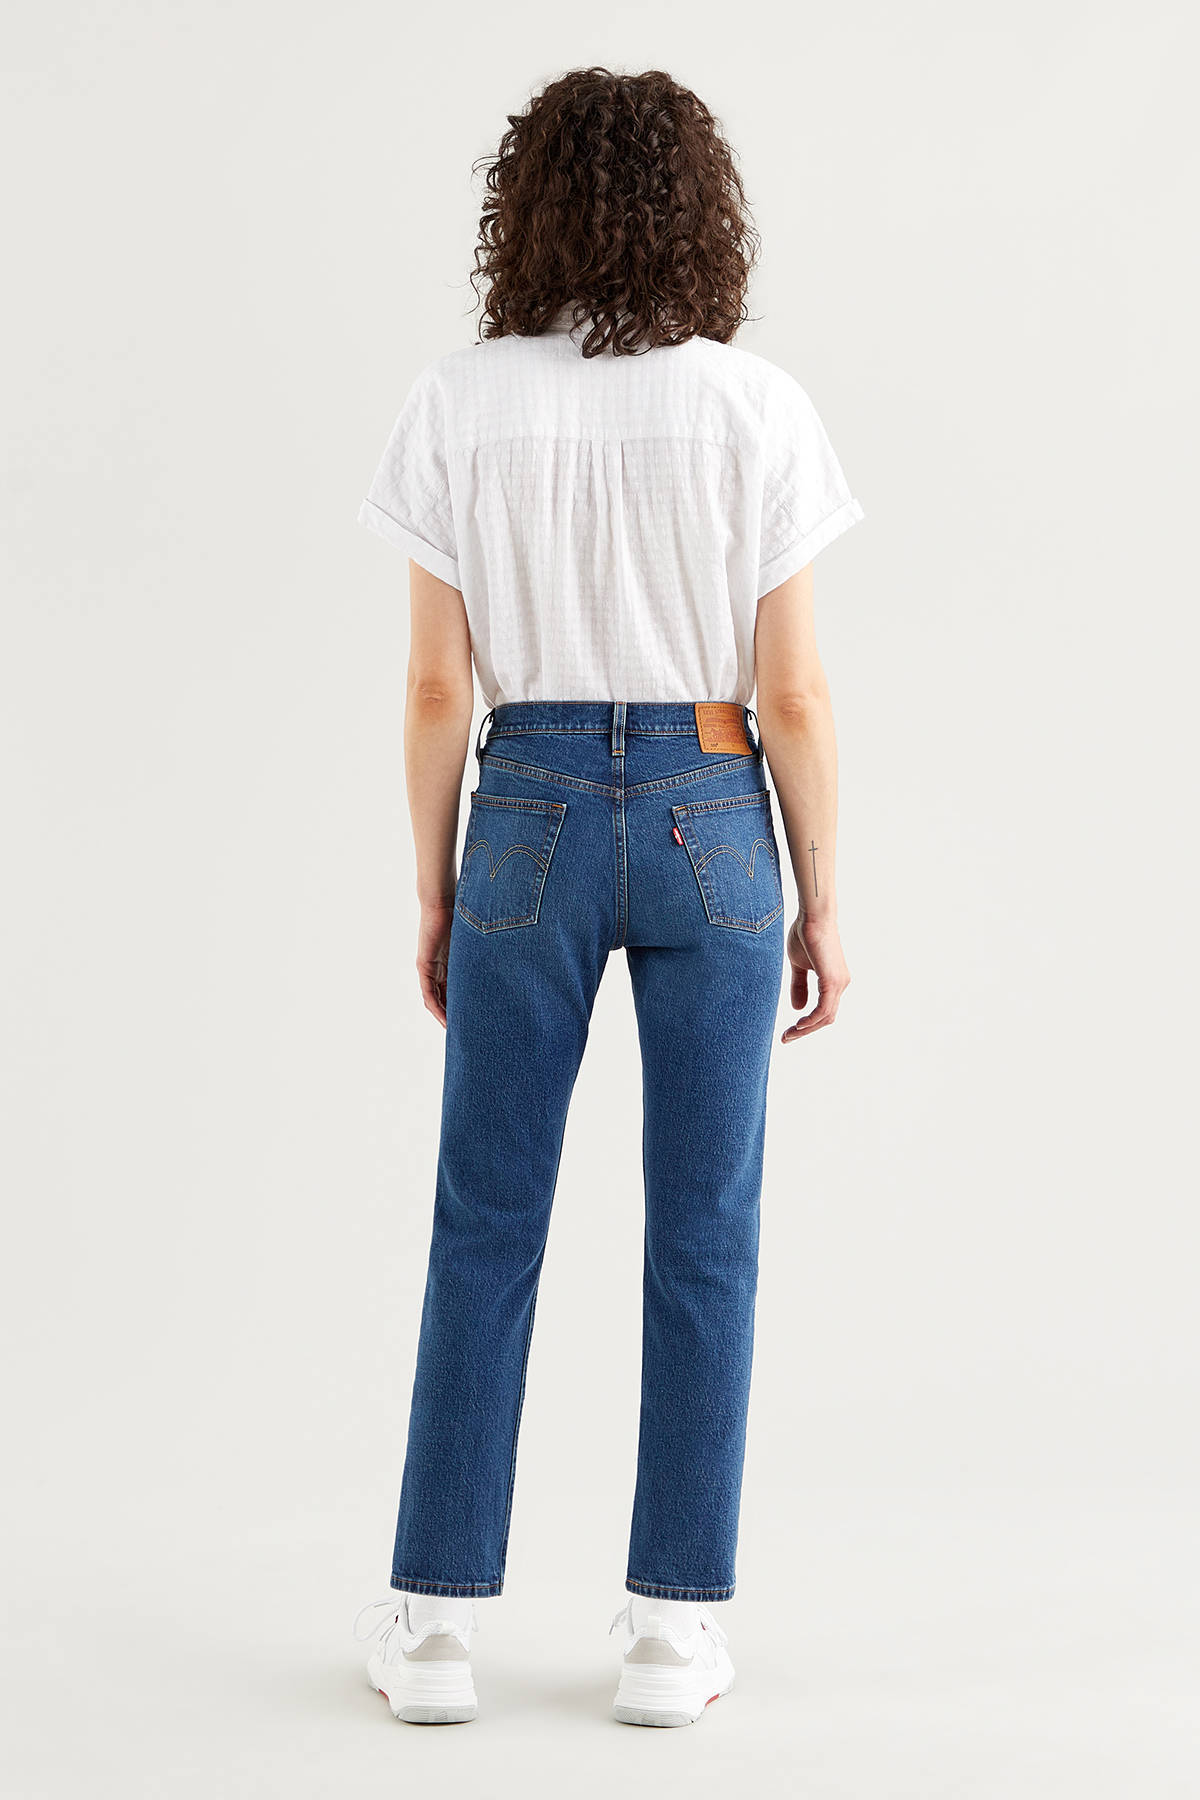 Levi's 501 crop high waist straight fit jeans charleston outlasted 